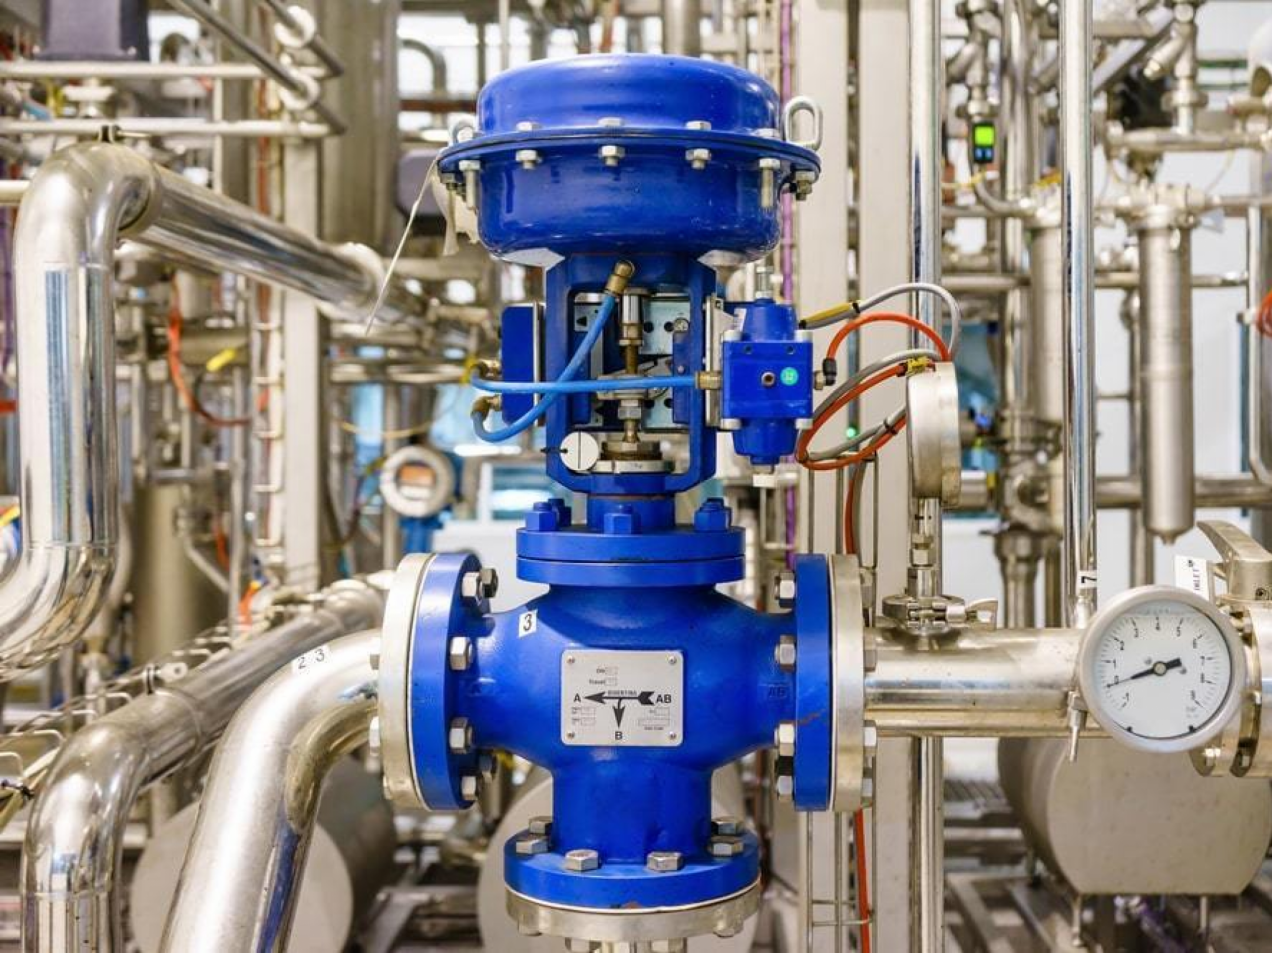 Smart control valve in the industry being monitored in real-time for maintenance and process optimization